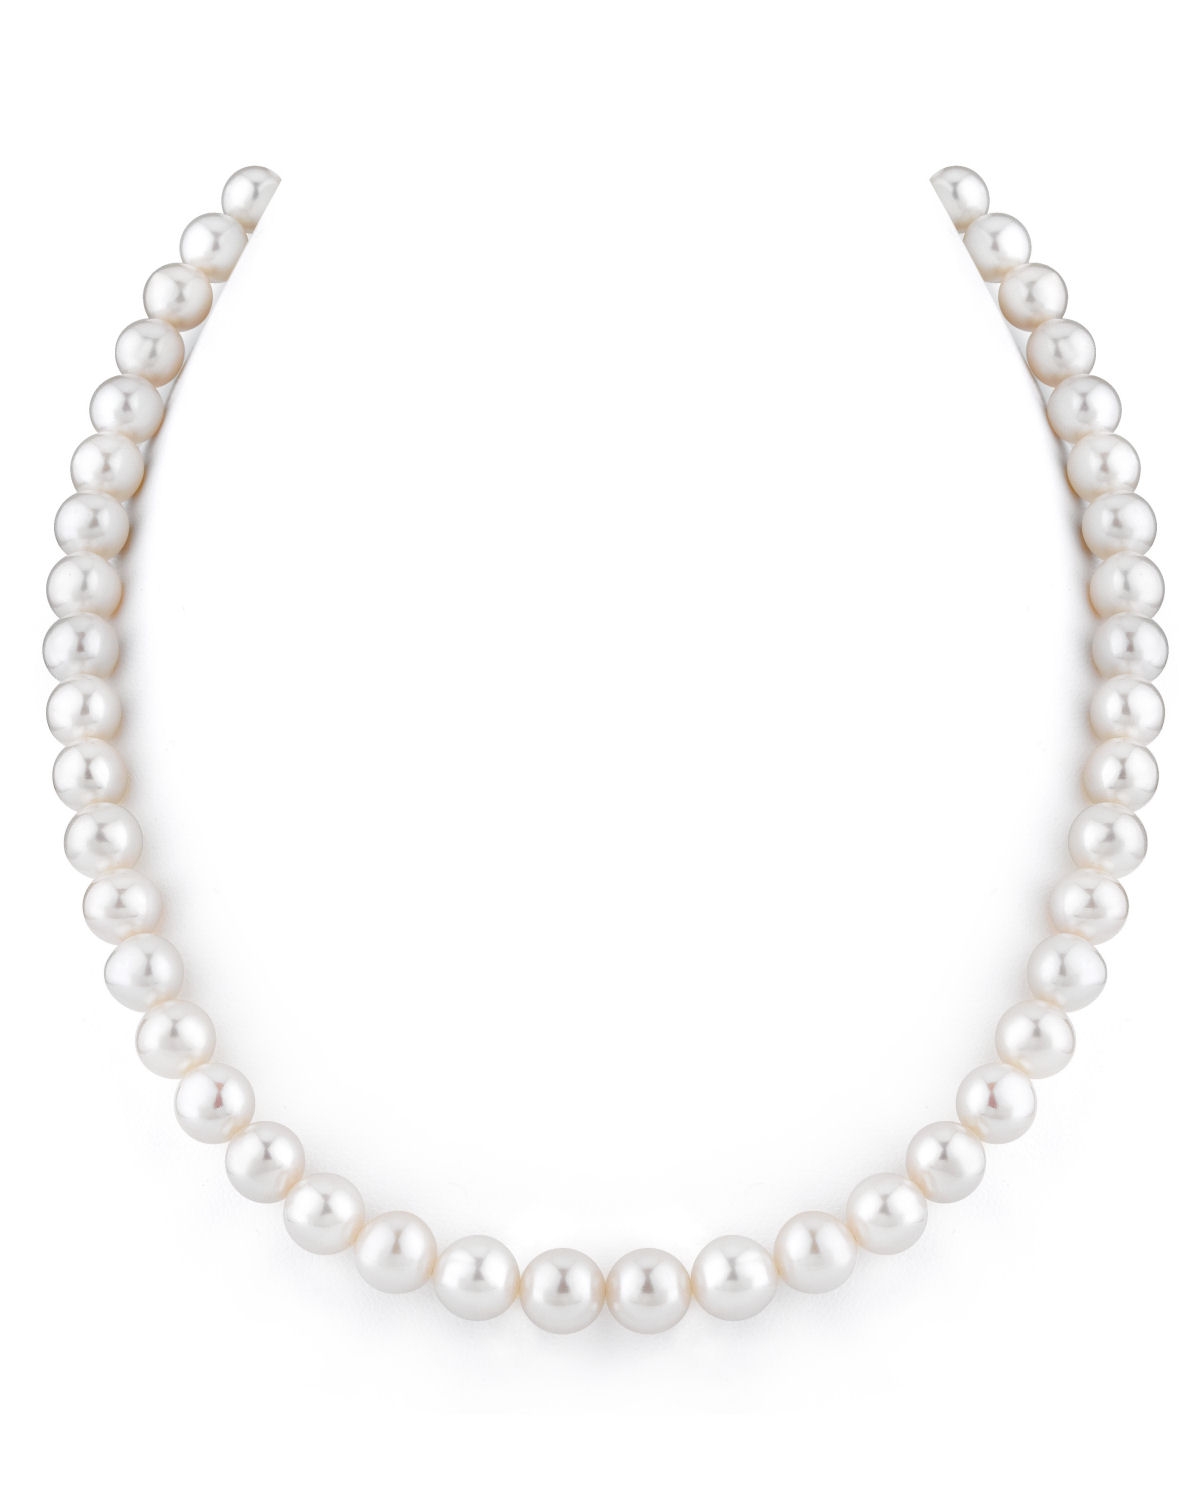 white pearl necklace 8-9mm white freshwater pearl necklace BFNATJC